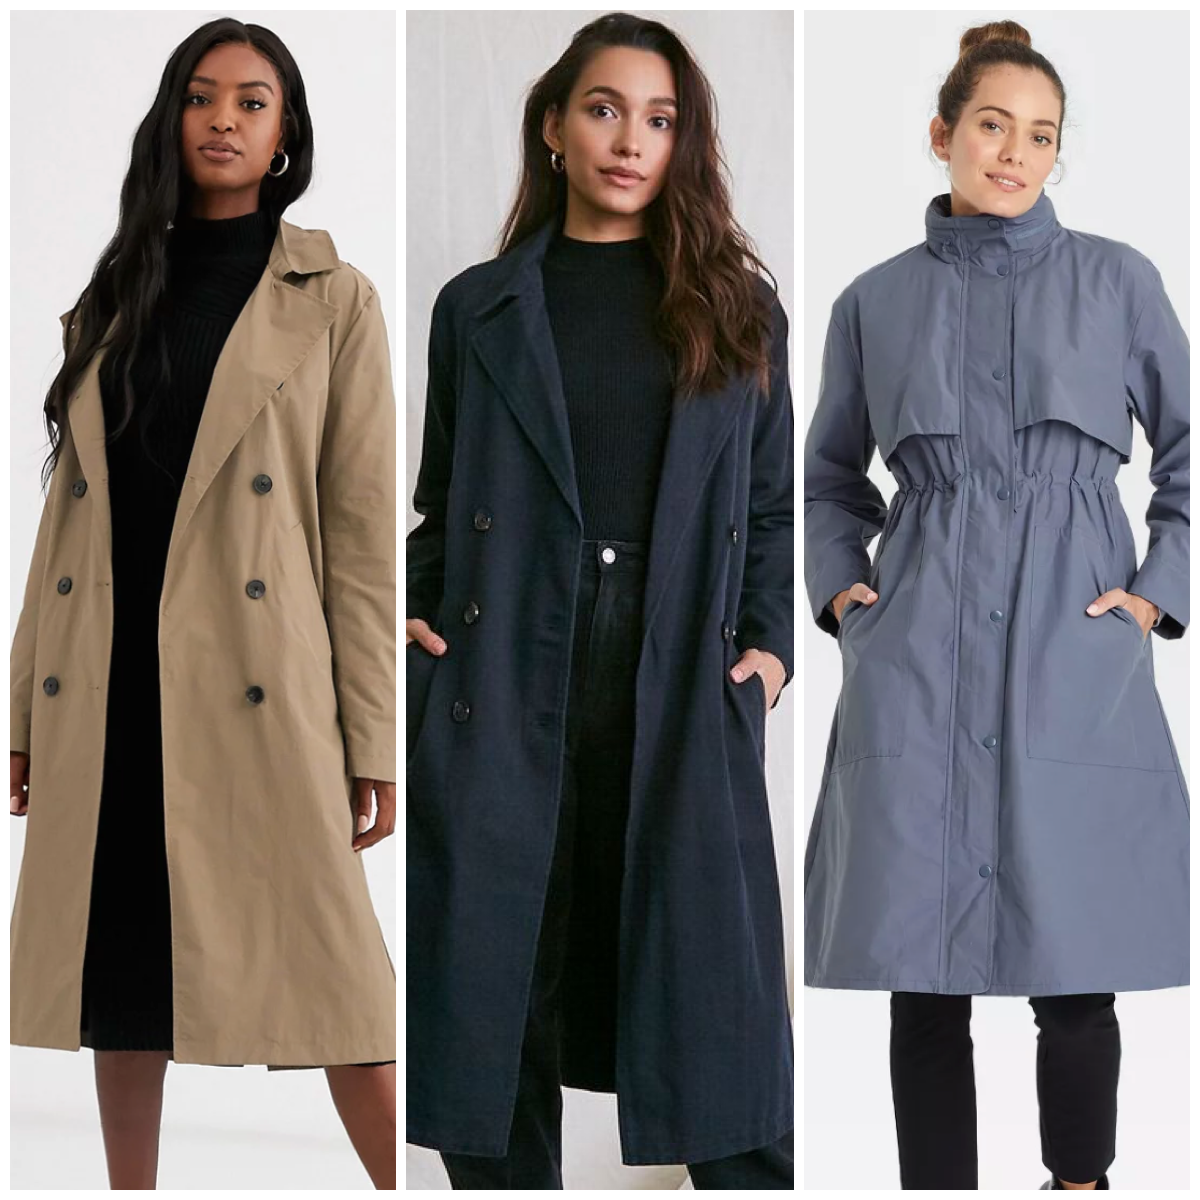 neef Klein Aggregaat 10 Chic Trench Coats for Under $50 - E! Online